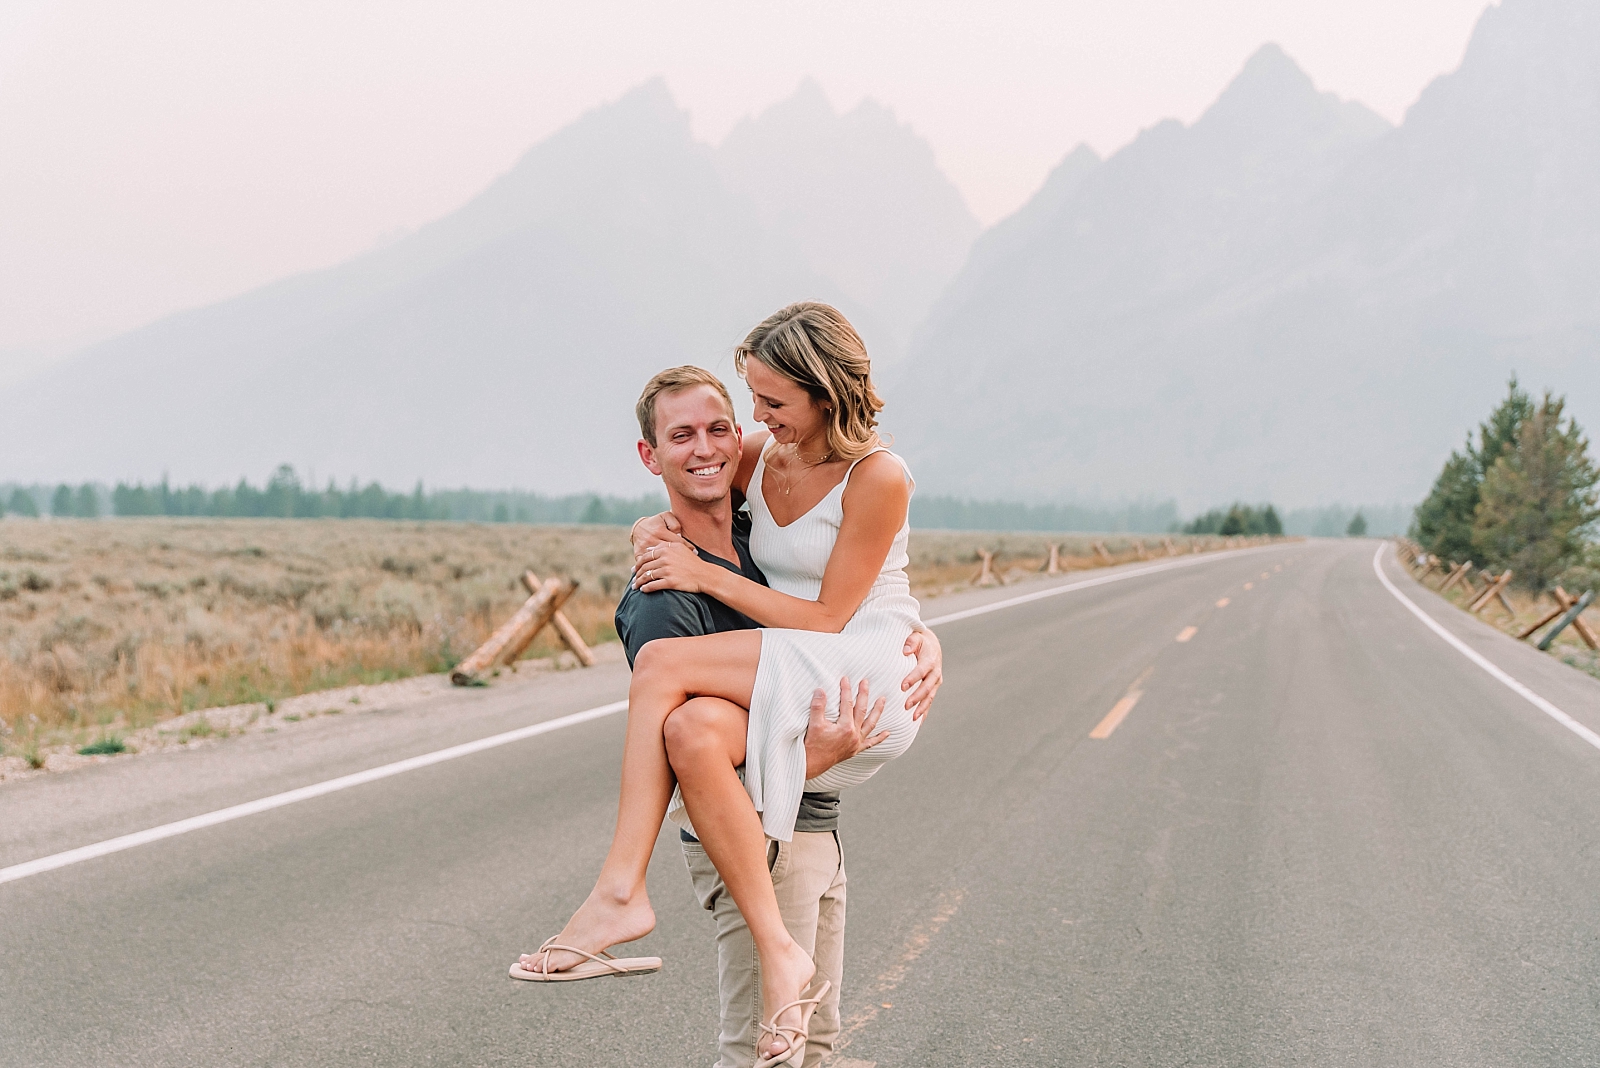 engagements in the tetons